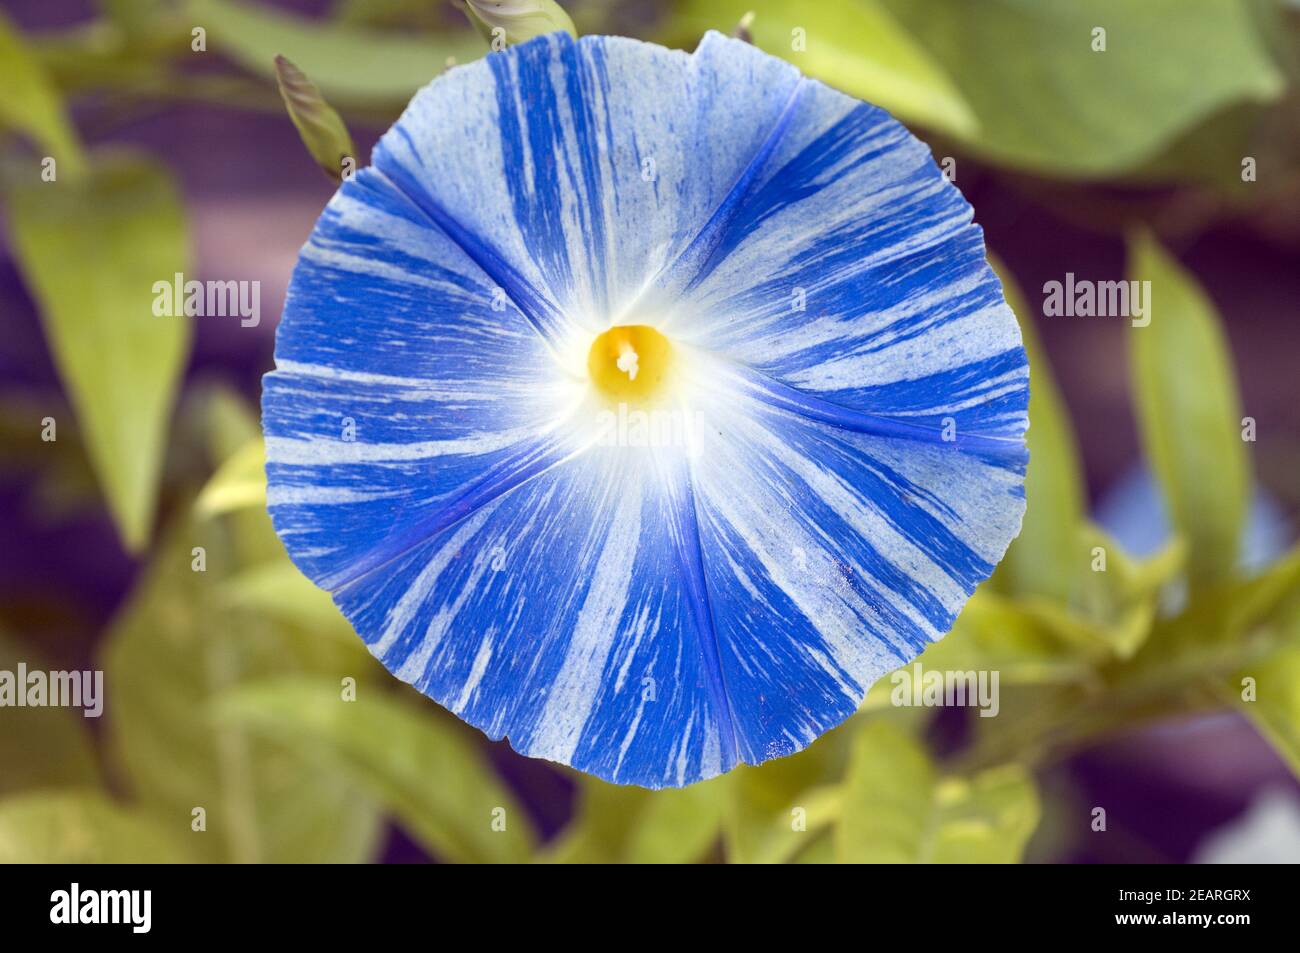 TRICHTERWINDE Ipomoea tricolor, Flying Saucer Stock Photo